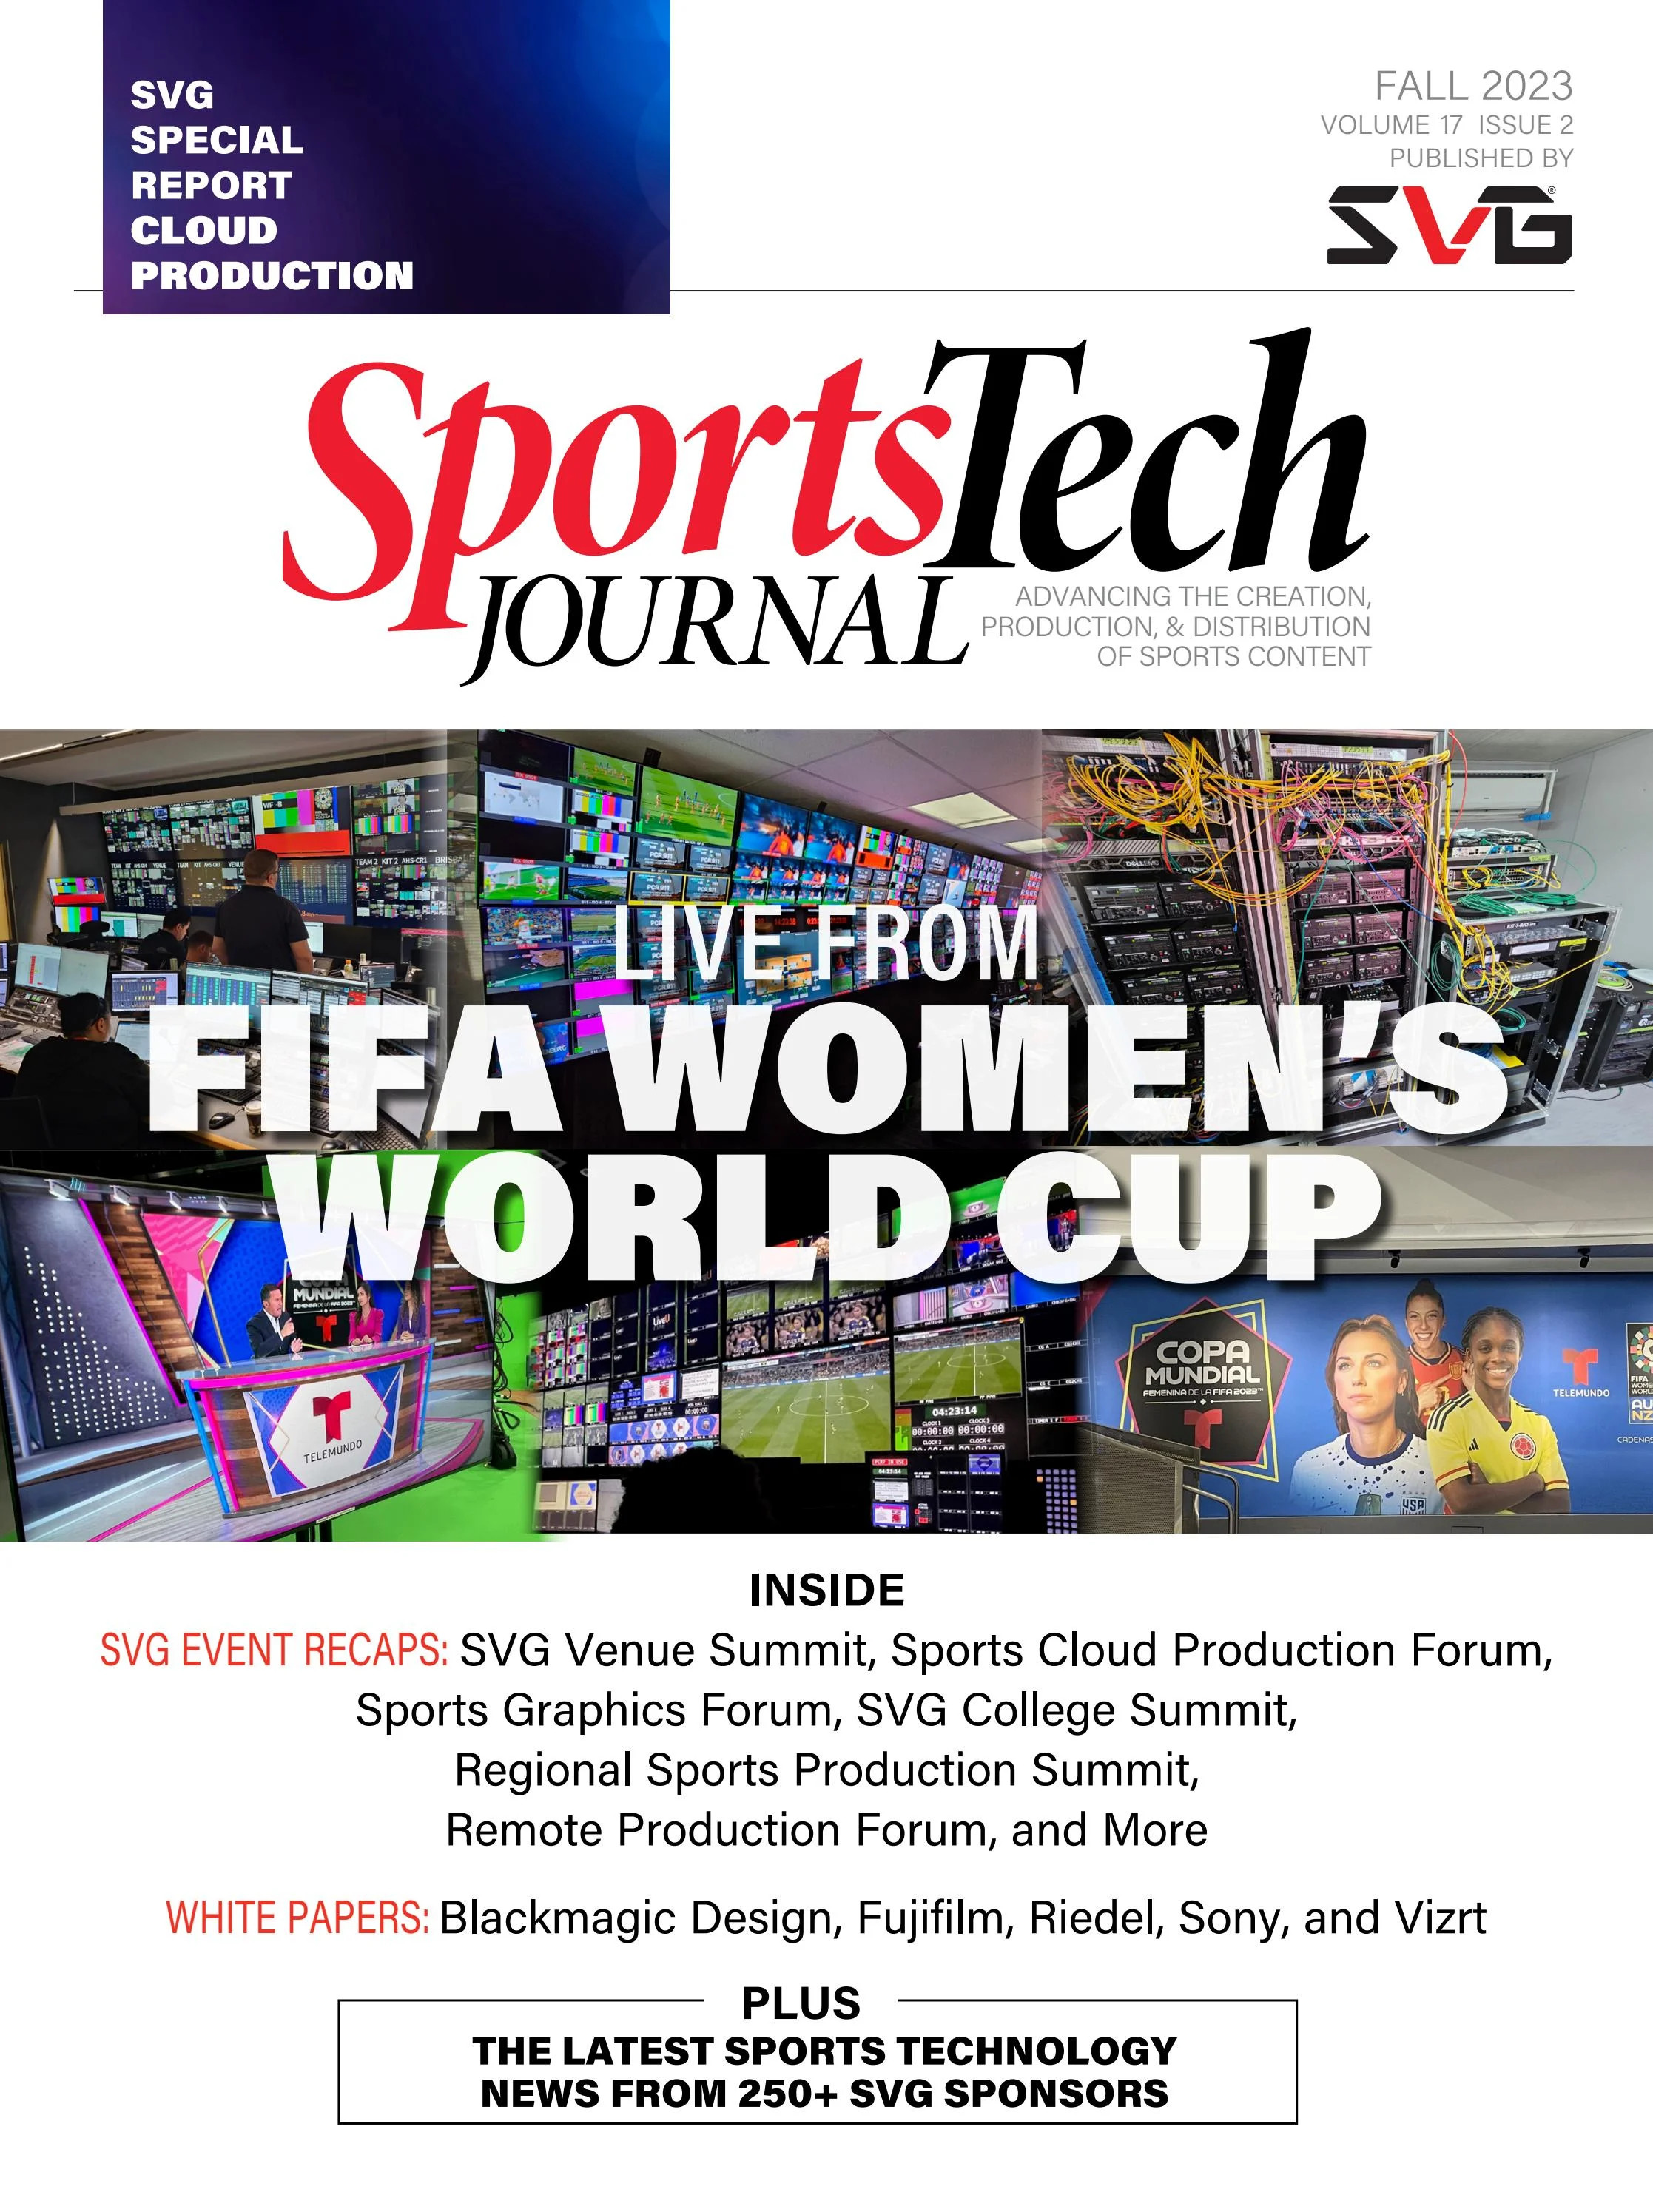 Sports Desk at TOI: Unlocking Live Events and Delivering Engaging Content